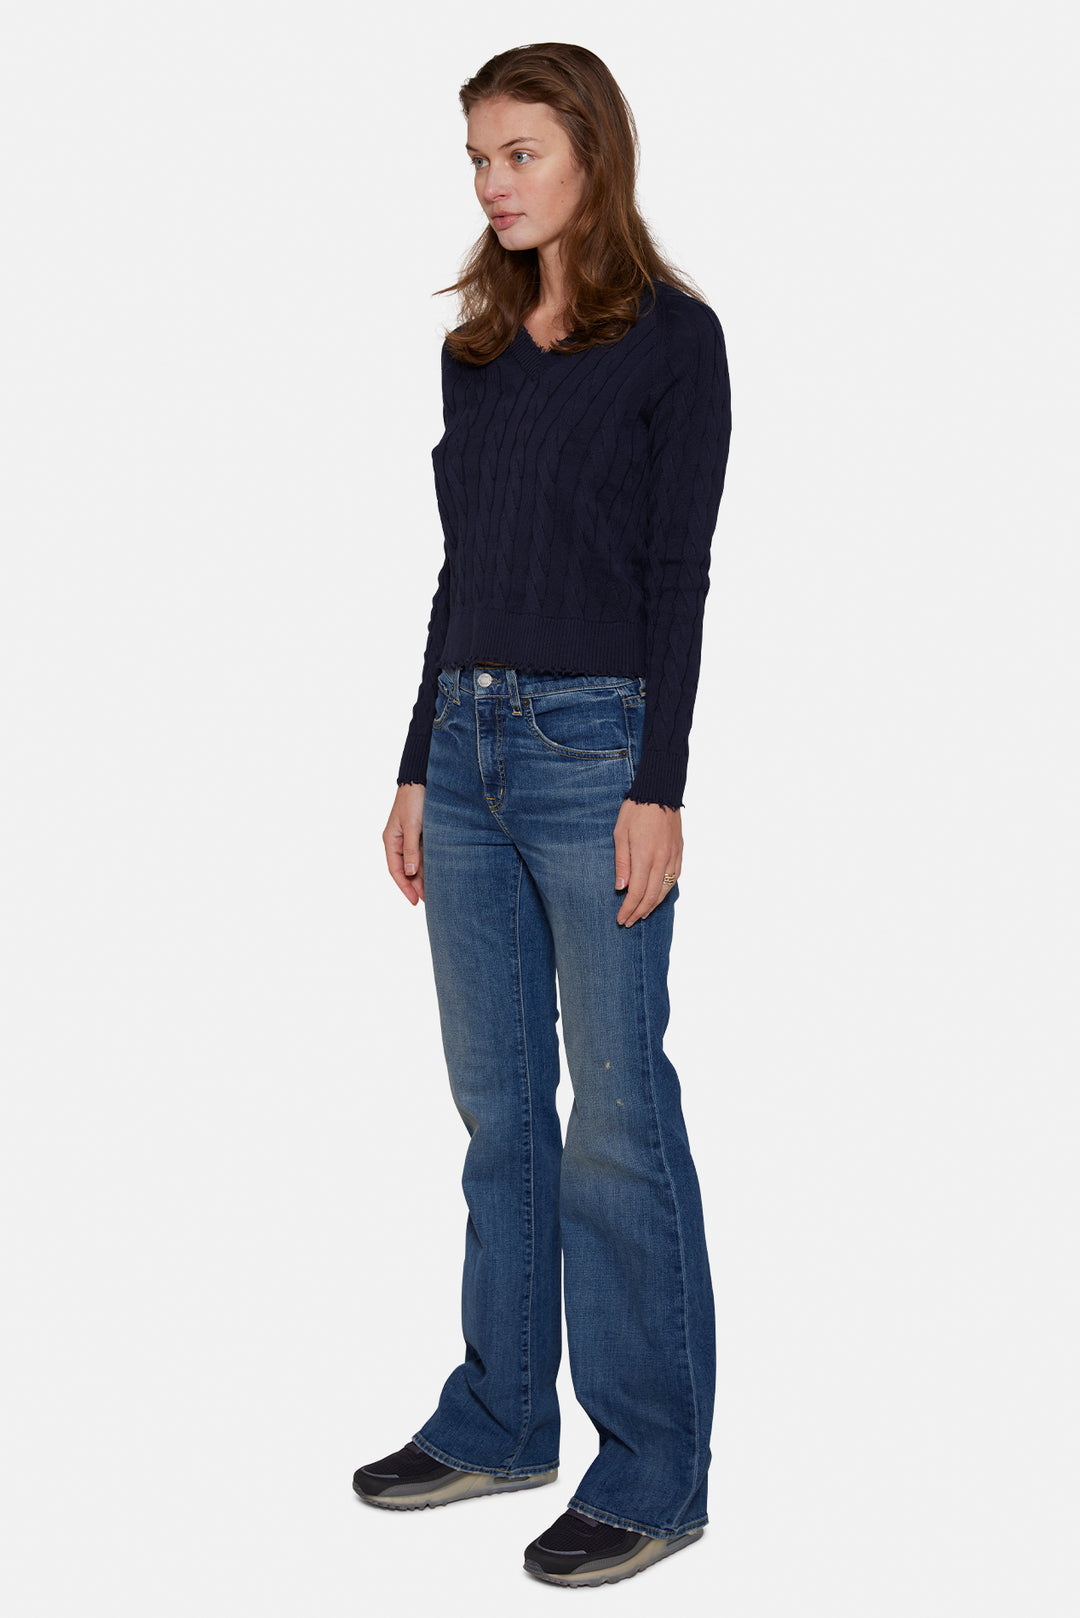 Amber Cable V Neck Sweater Navy